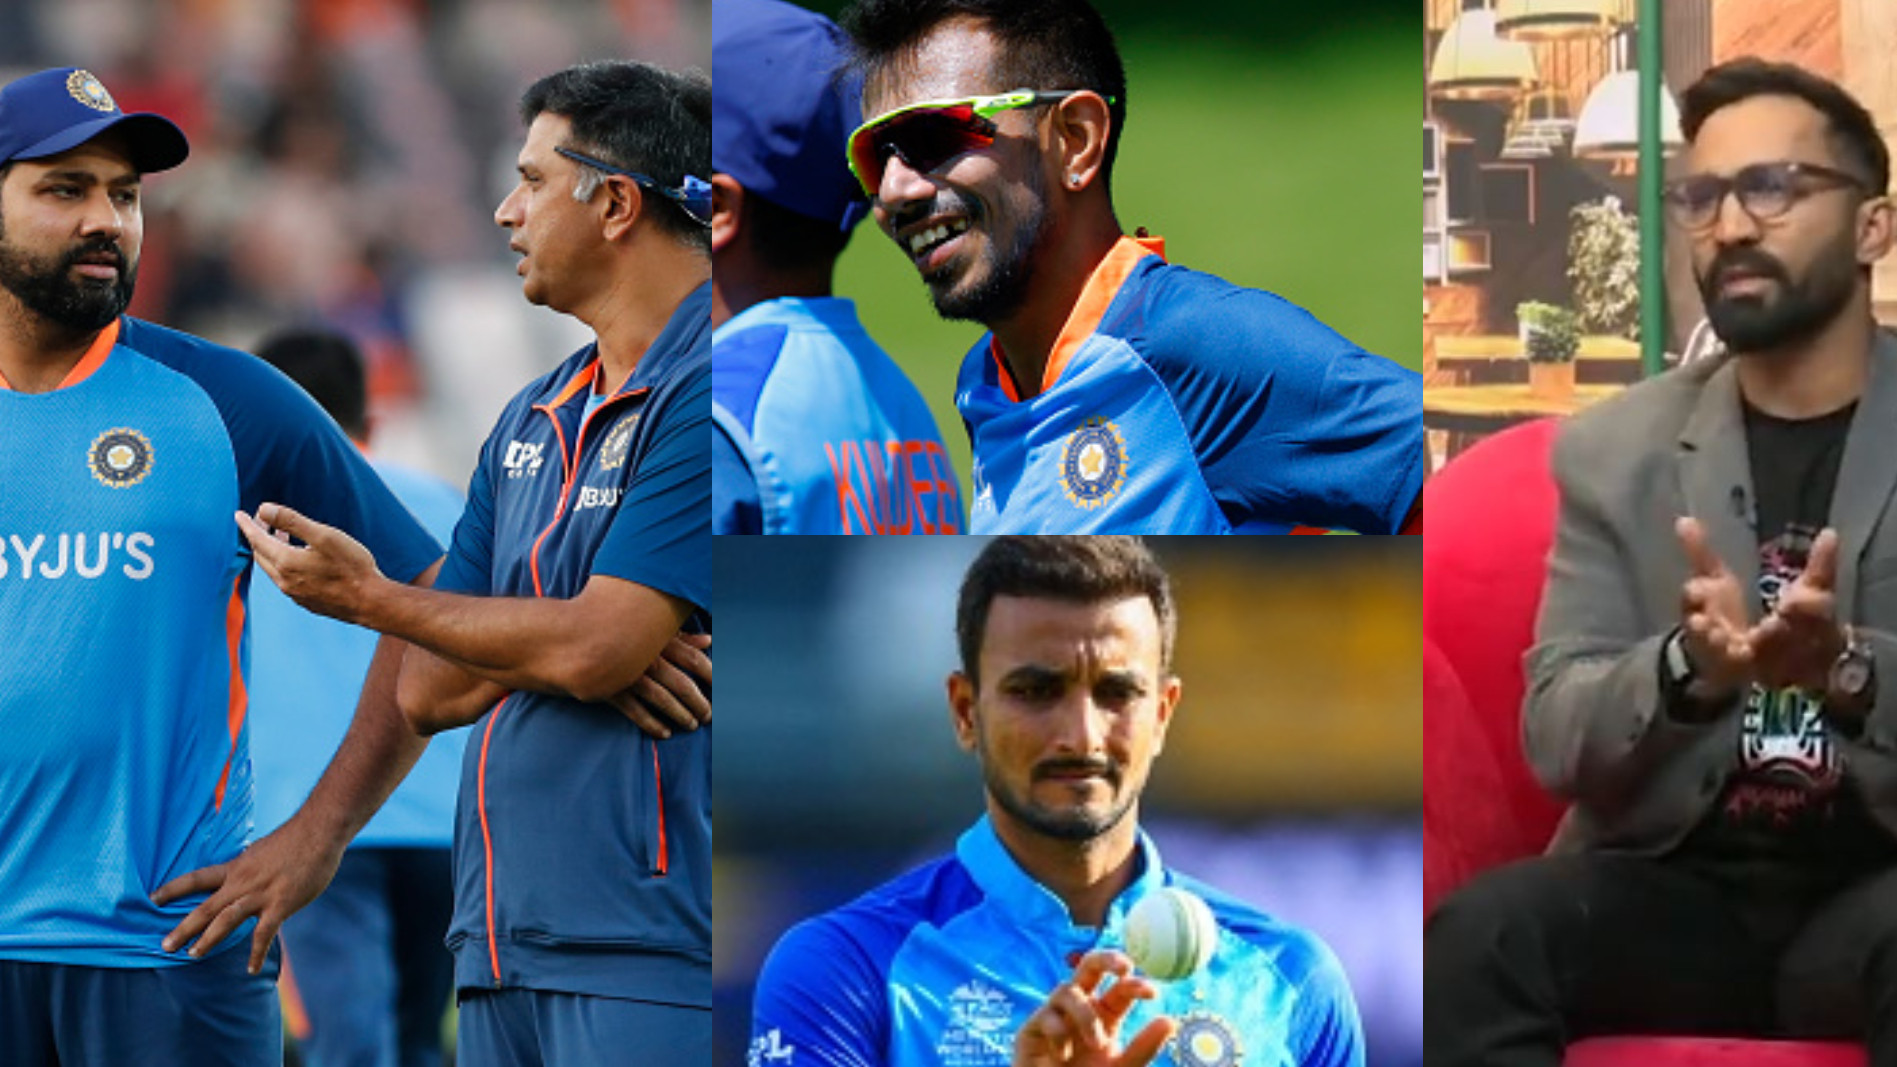 Rohit and Dravid made Chahal and Harshal feel secure ahead of T20 World Cup- Dinesh Karthik